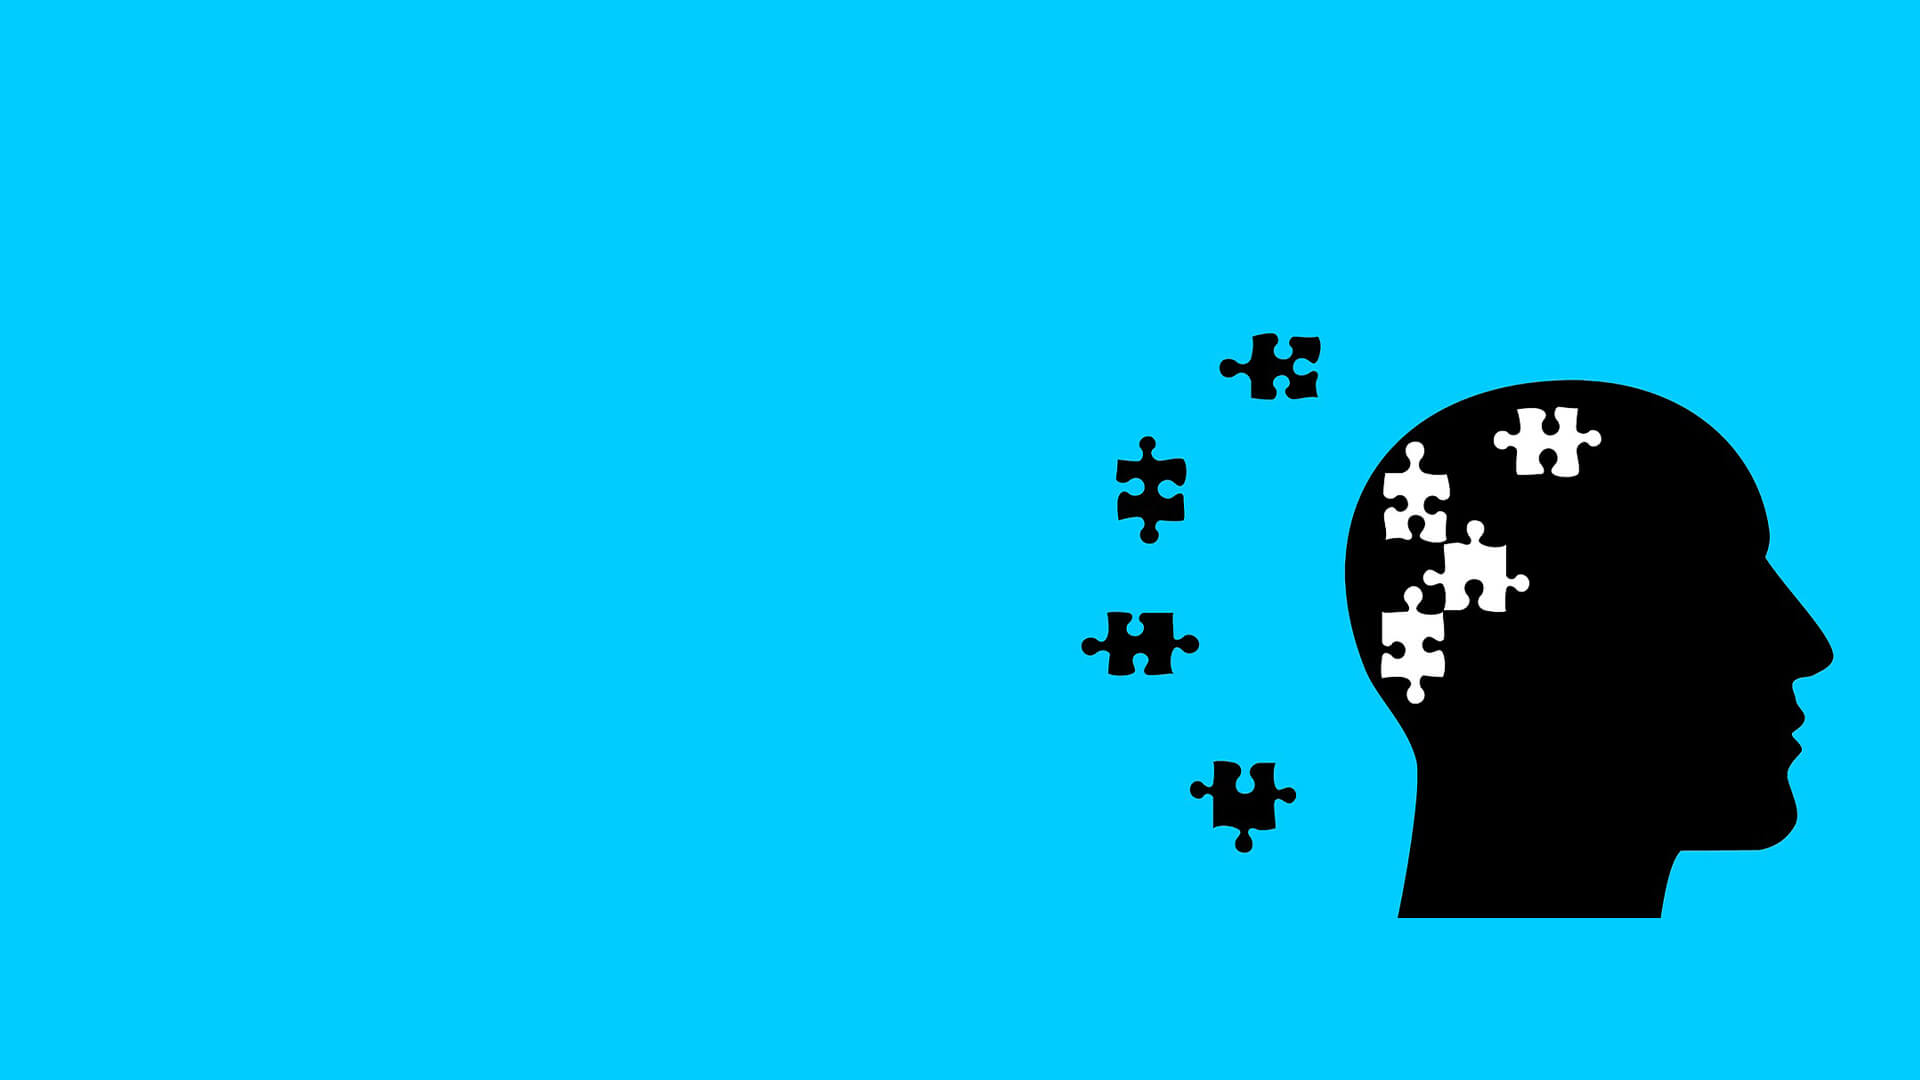 Home page slider image - Psychology, the head and puzzle pieces